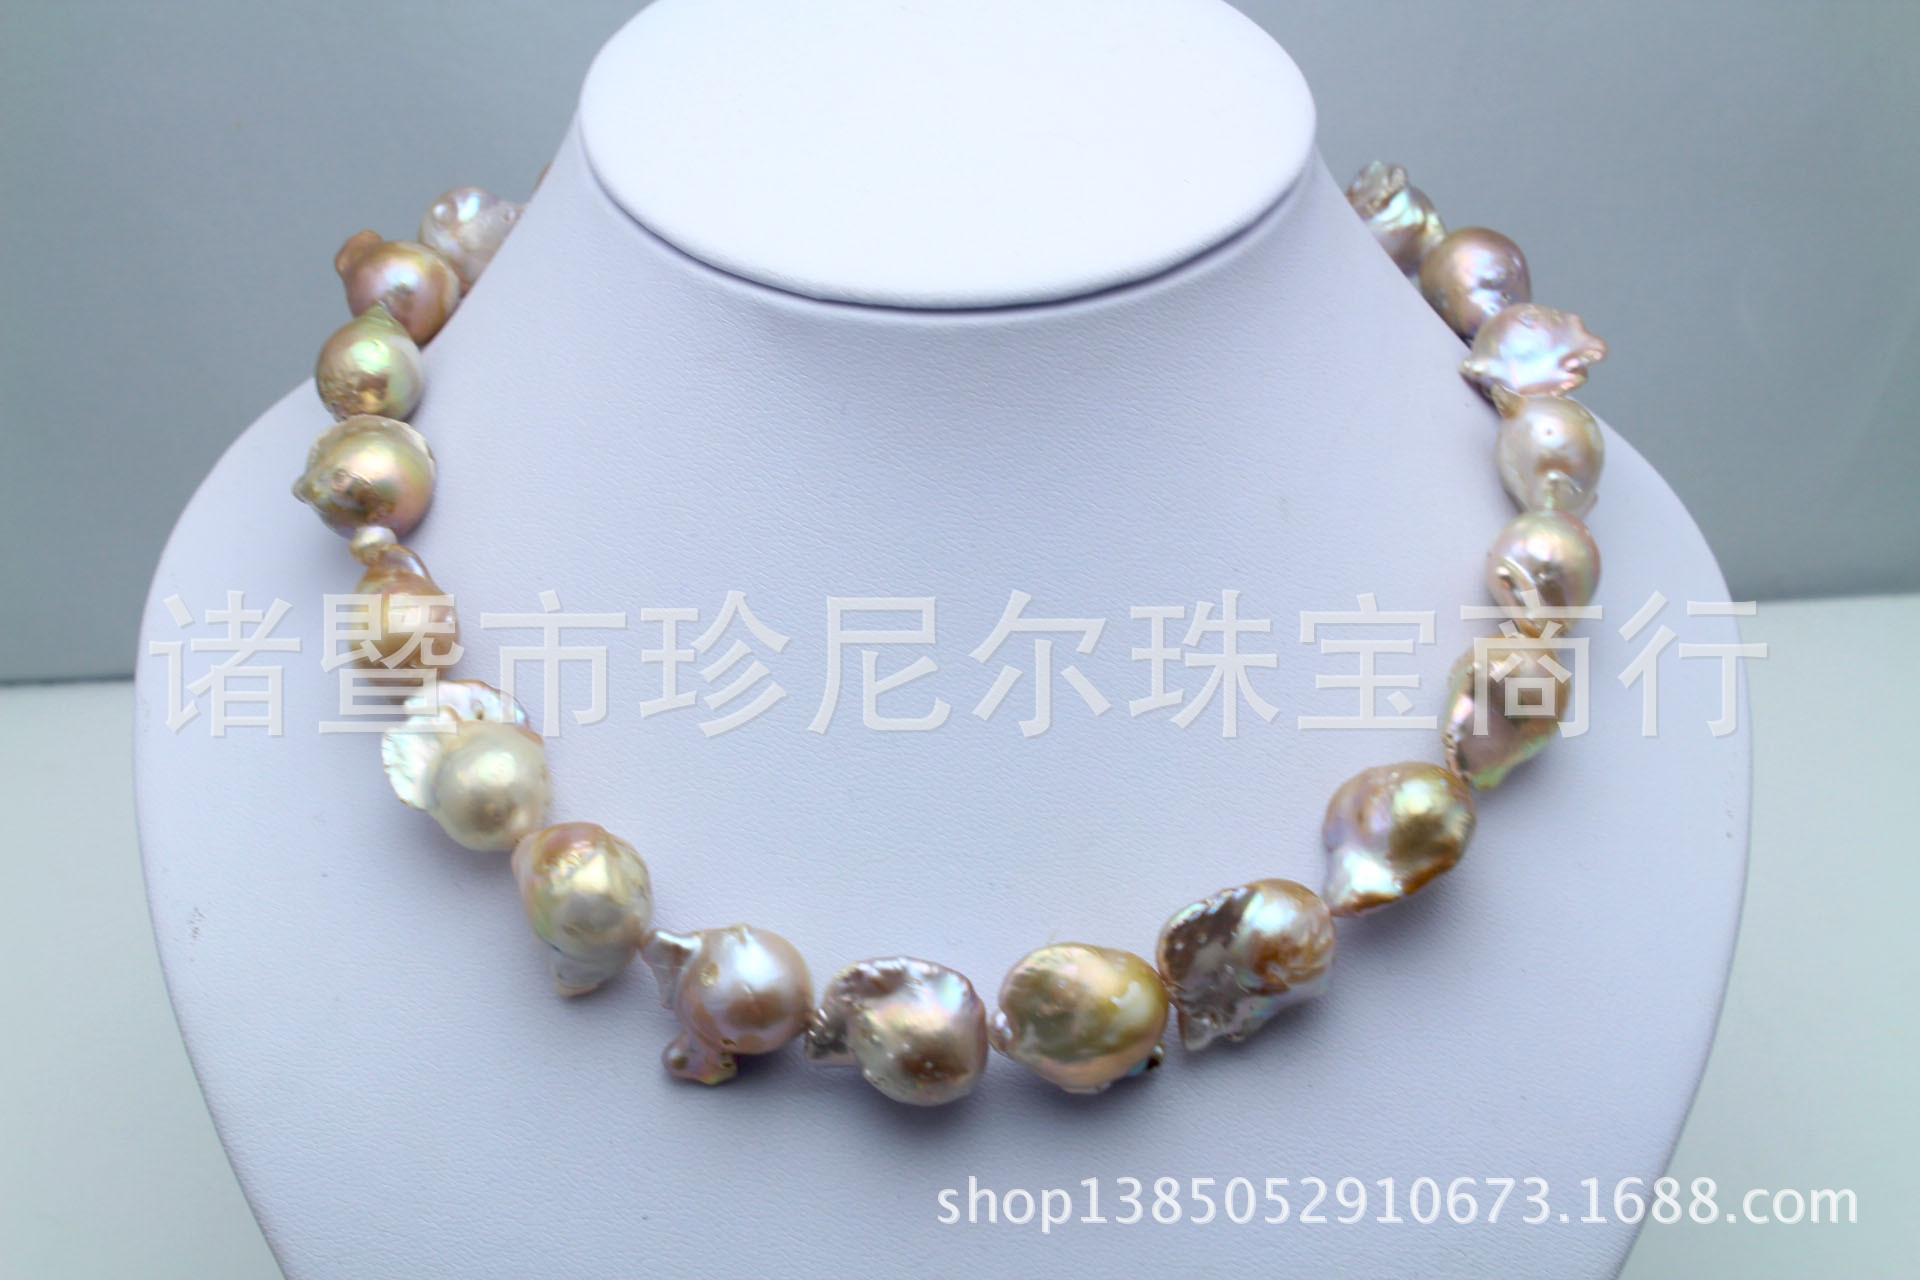 Freshwater Pearl Shaped Pearl Nude Necklace Baroque Pearl Necklace